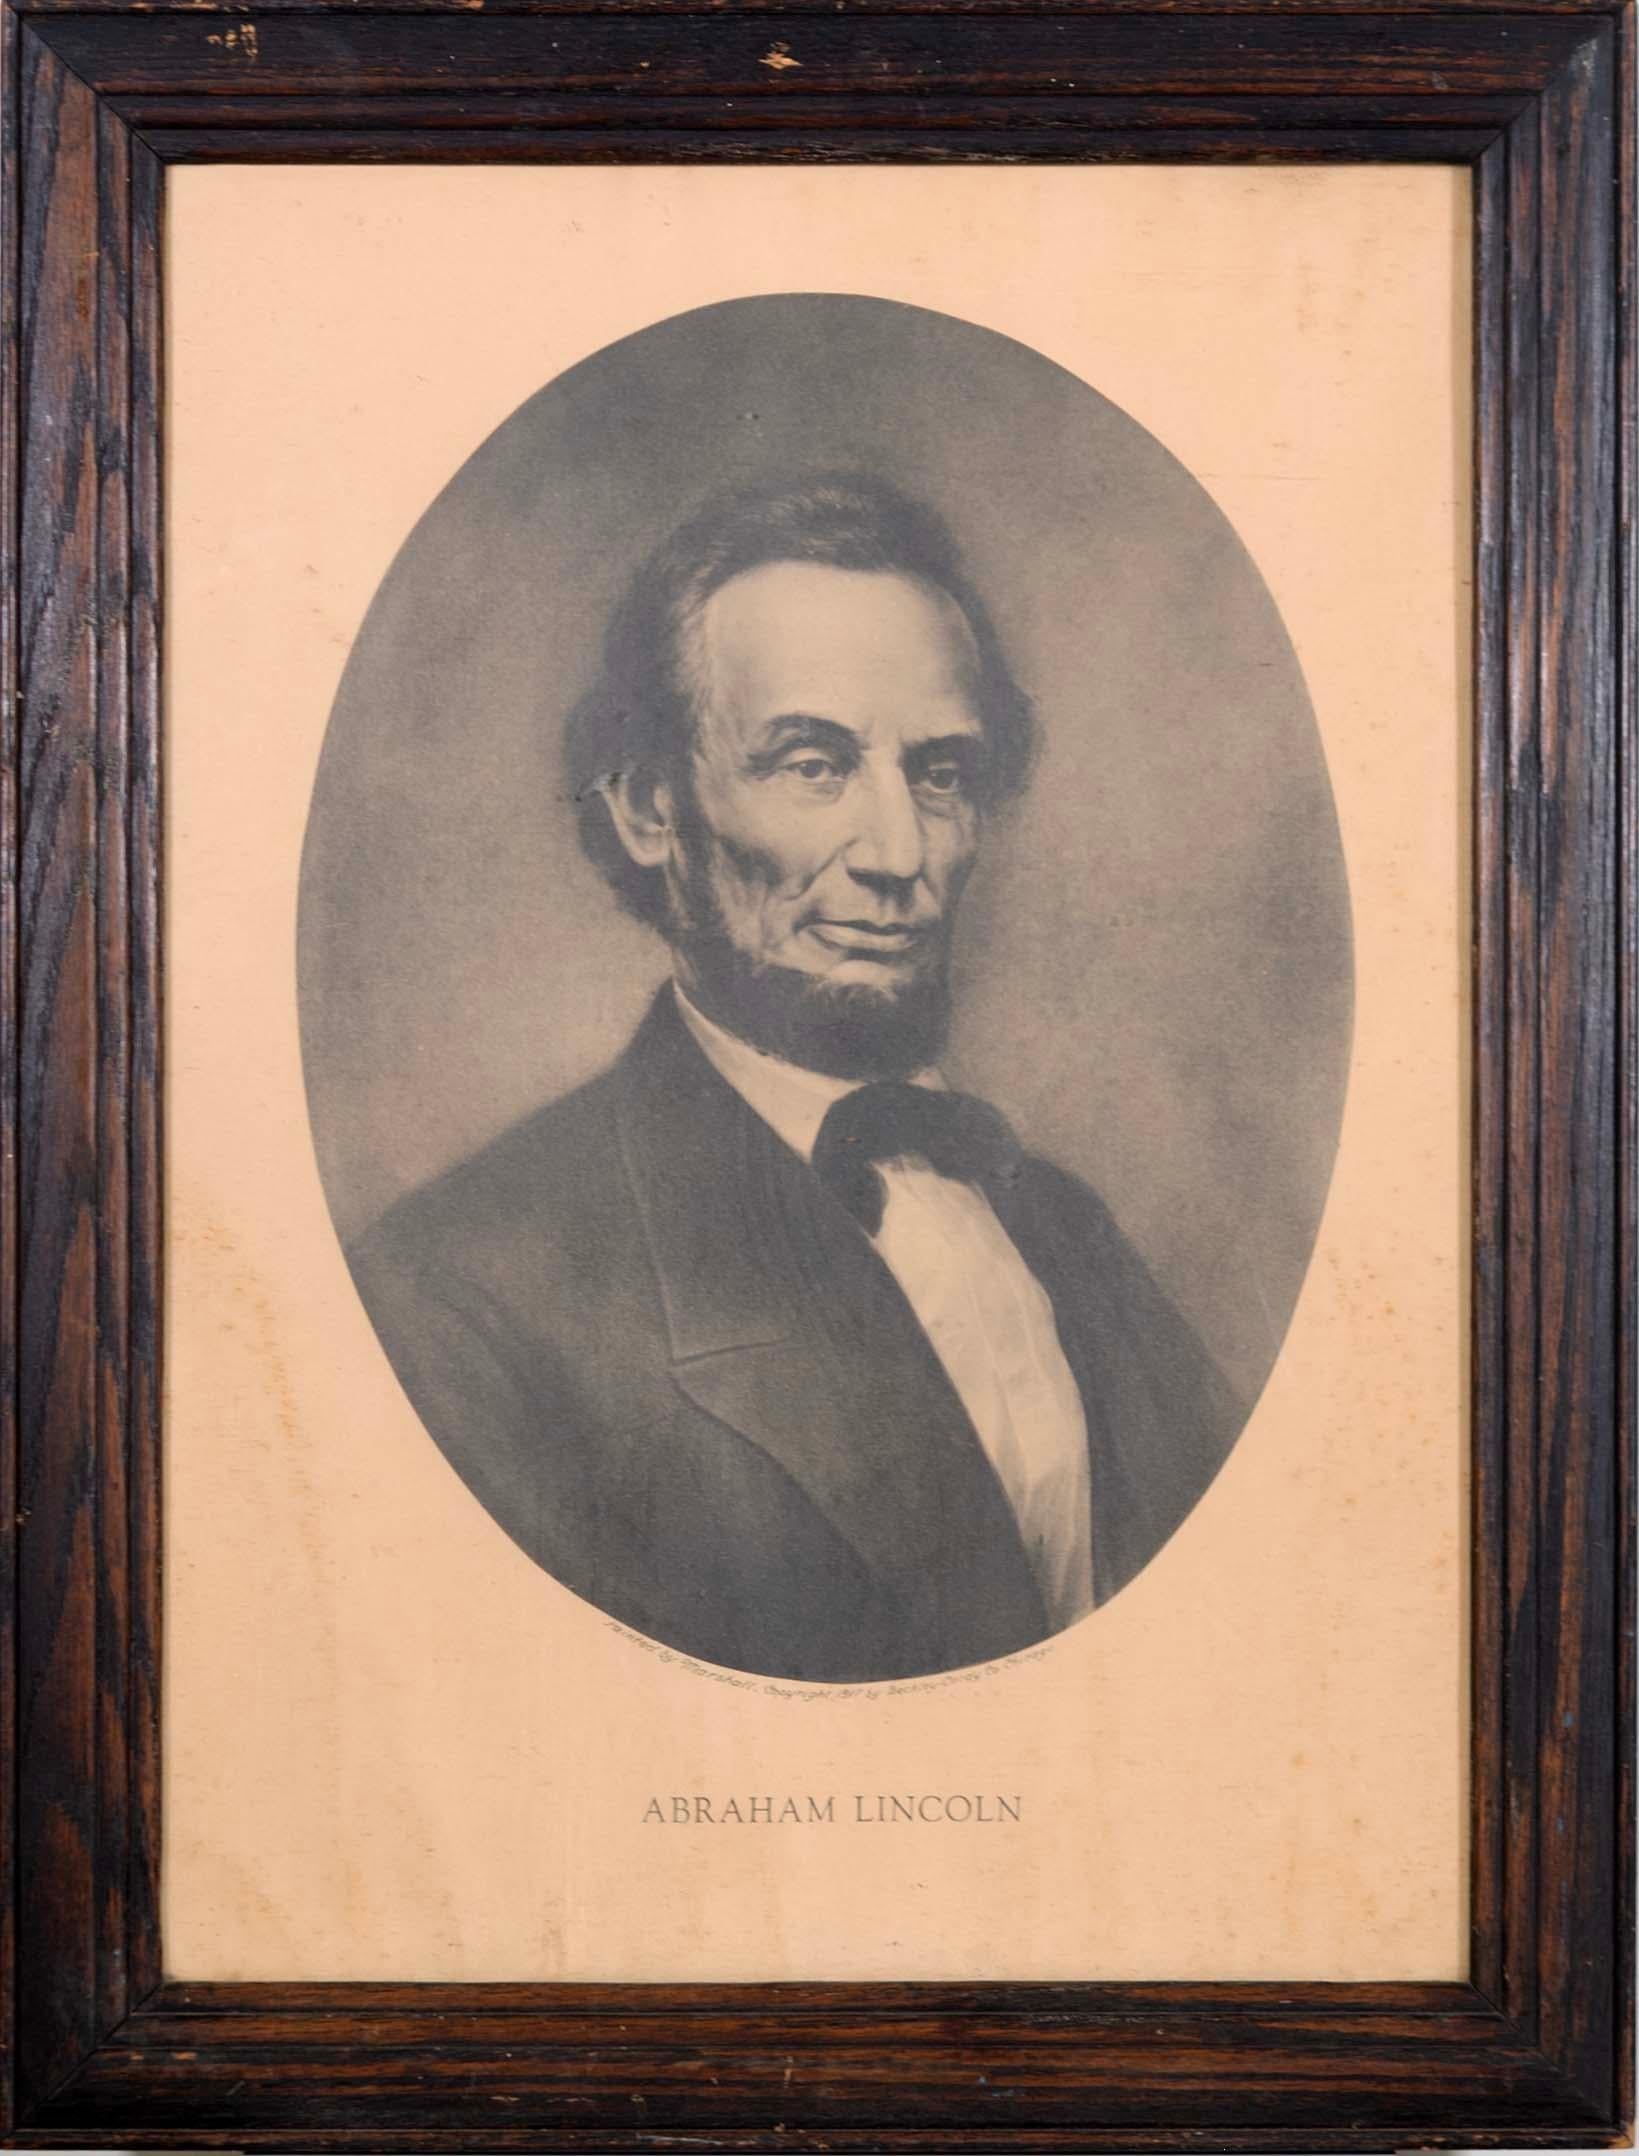 An antique vintage lithographic portrait of an engraving of Abraham Lincoln by William Edgar Marshall (after). Printed in 1917, Chicago: Berkley-Cardy Co. This engraving was praised for being the finest portrait ever done of Abraham Lincoln. From a